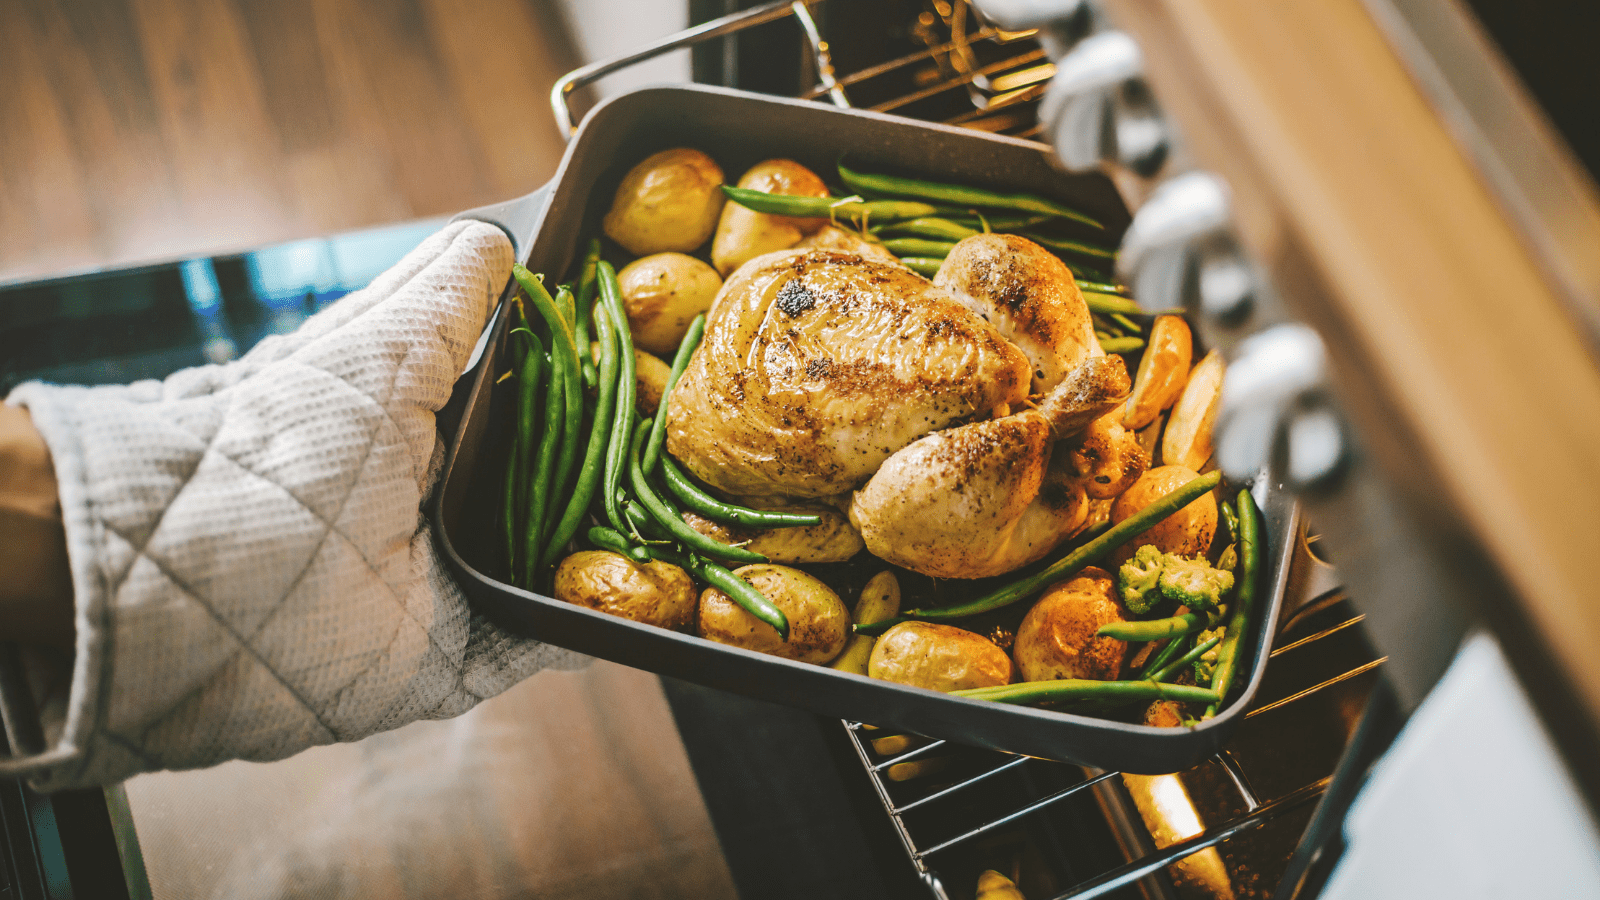 Person removes roasted poultry and veggies from oven